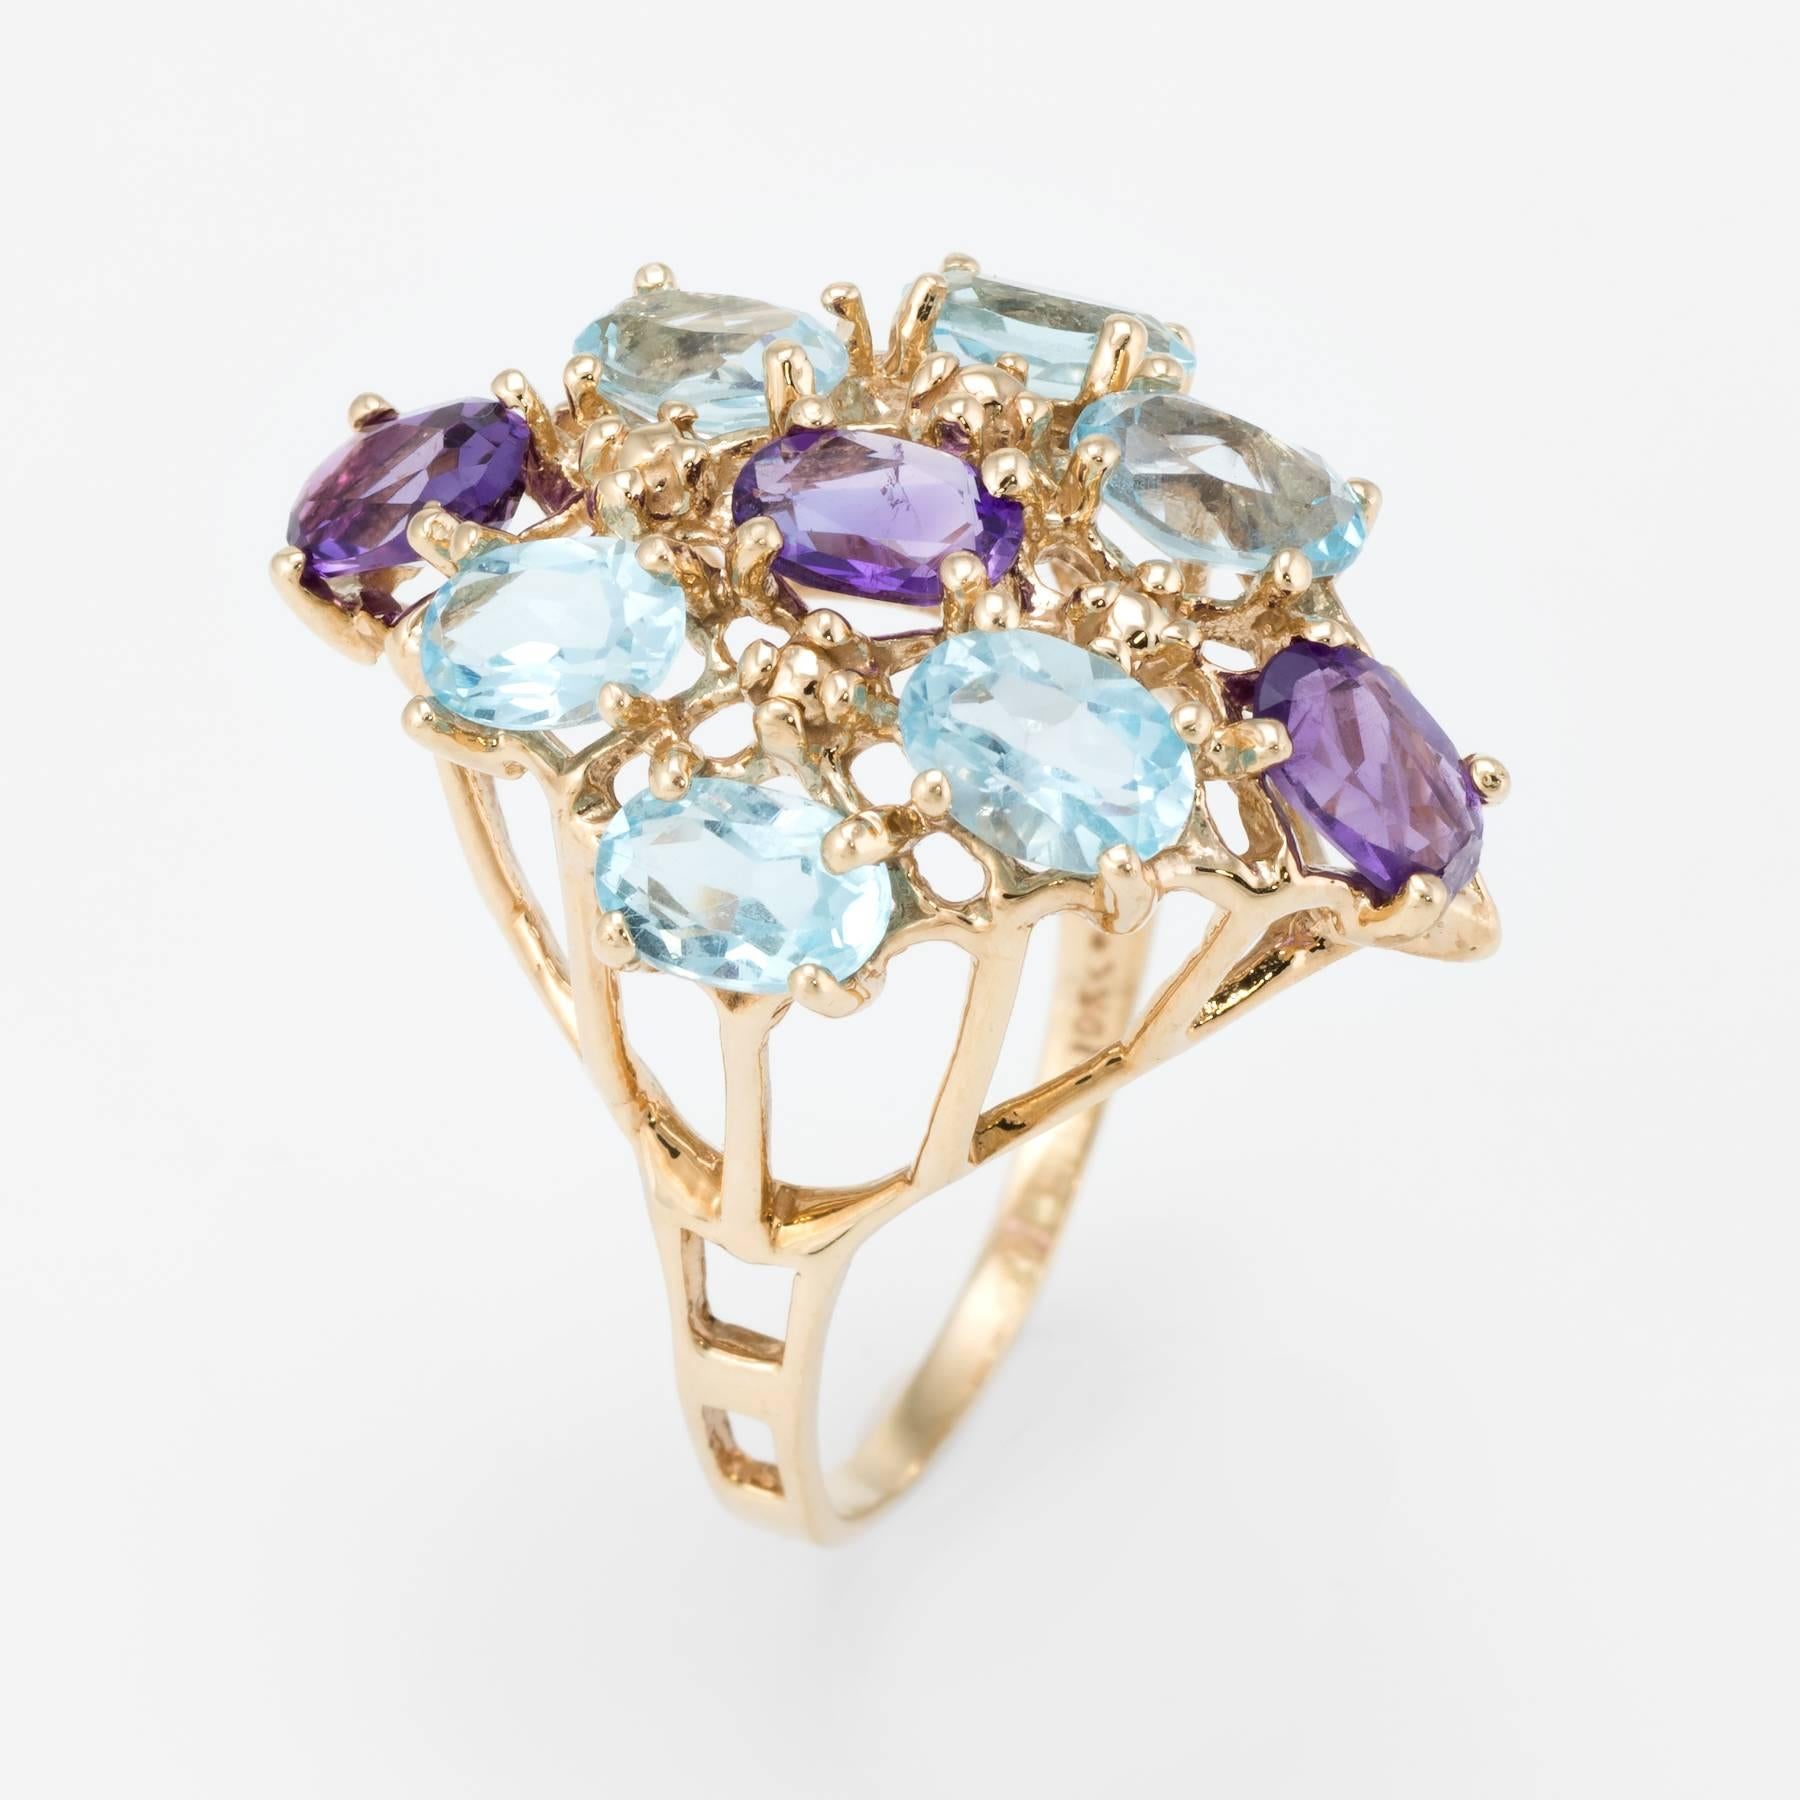 Elegant estate cocktail ring, crafted in 10 karat yellow gold. 

Faceted oval cut amethyst and blue topaz each measure 6mm x 4mm. The amethyst totals an estimated 1.15 carats and the blue topaz totals an estimated 3 carats. The stones are in